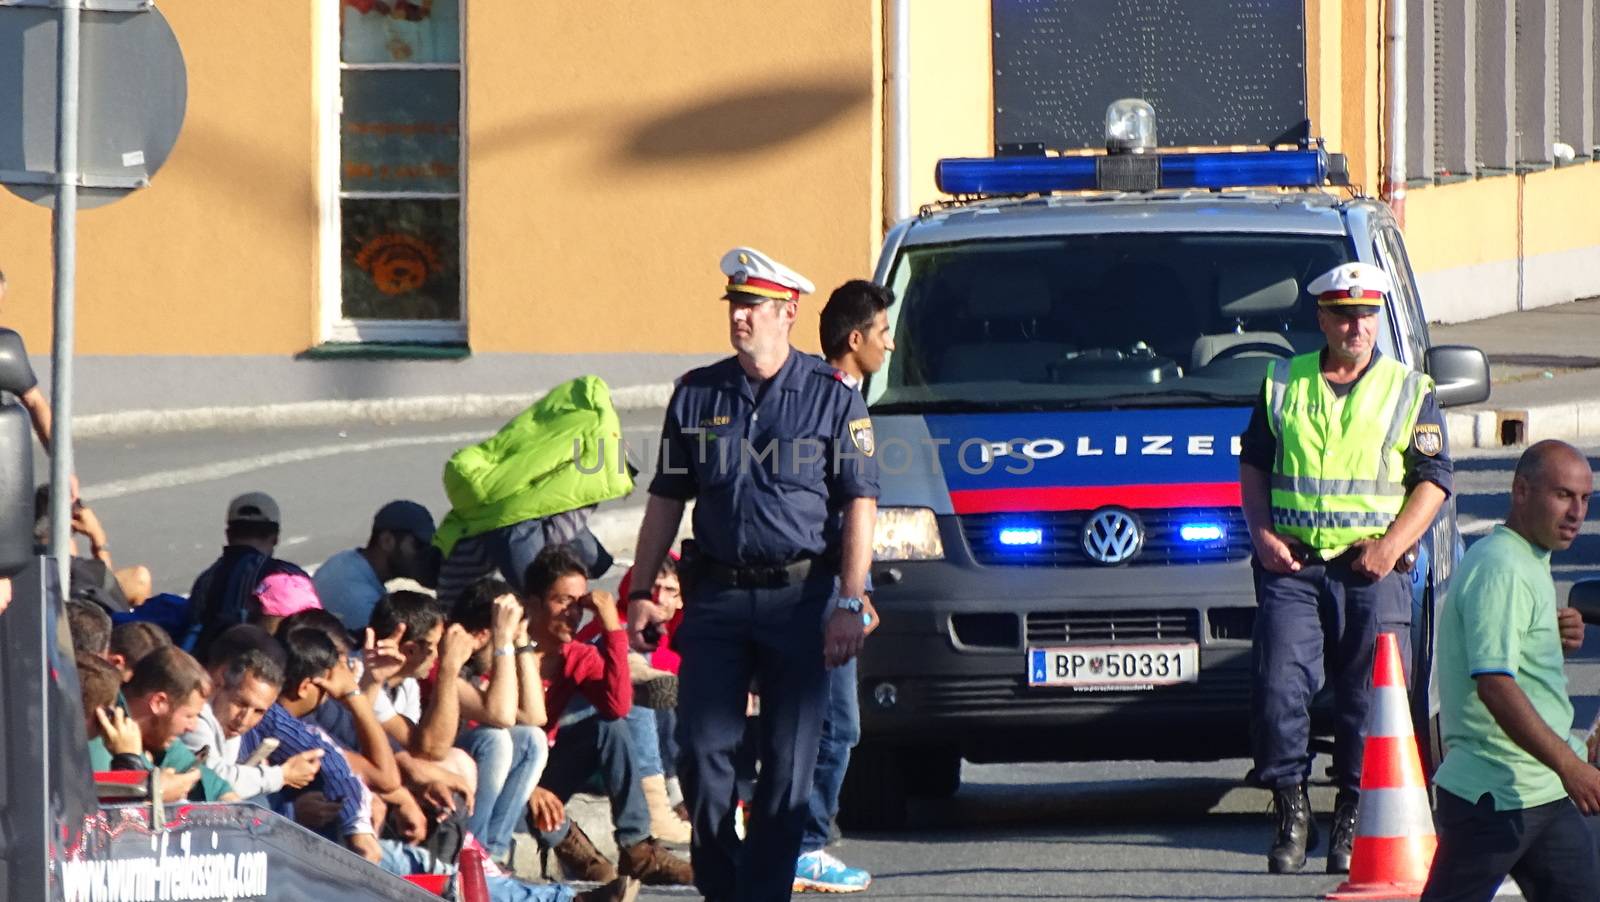 GERMANY, Freilassing: Refugees being stopped by police as they enter Germany from Austria at Freilassing train station, on September 21, 2015. 	The station has become a huge processing camp for migrants heading to Germany, following strict border controls being introduced. German police are now boarding trains from Austria and checking the documents of travellers. 